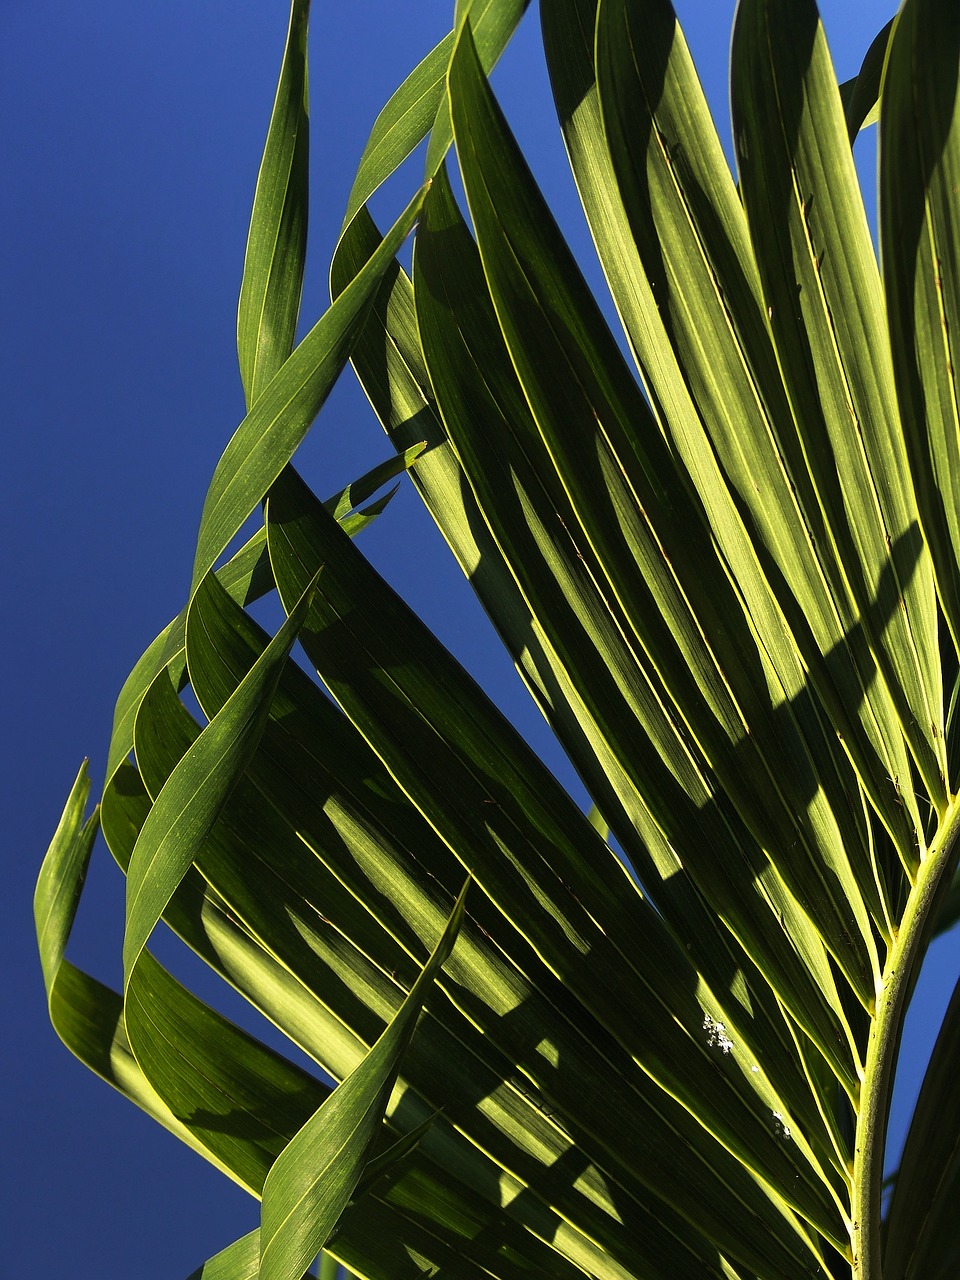 Image - palm leaves young palm tree